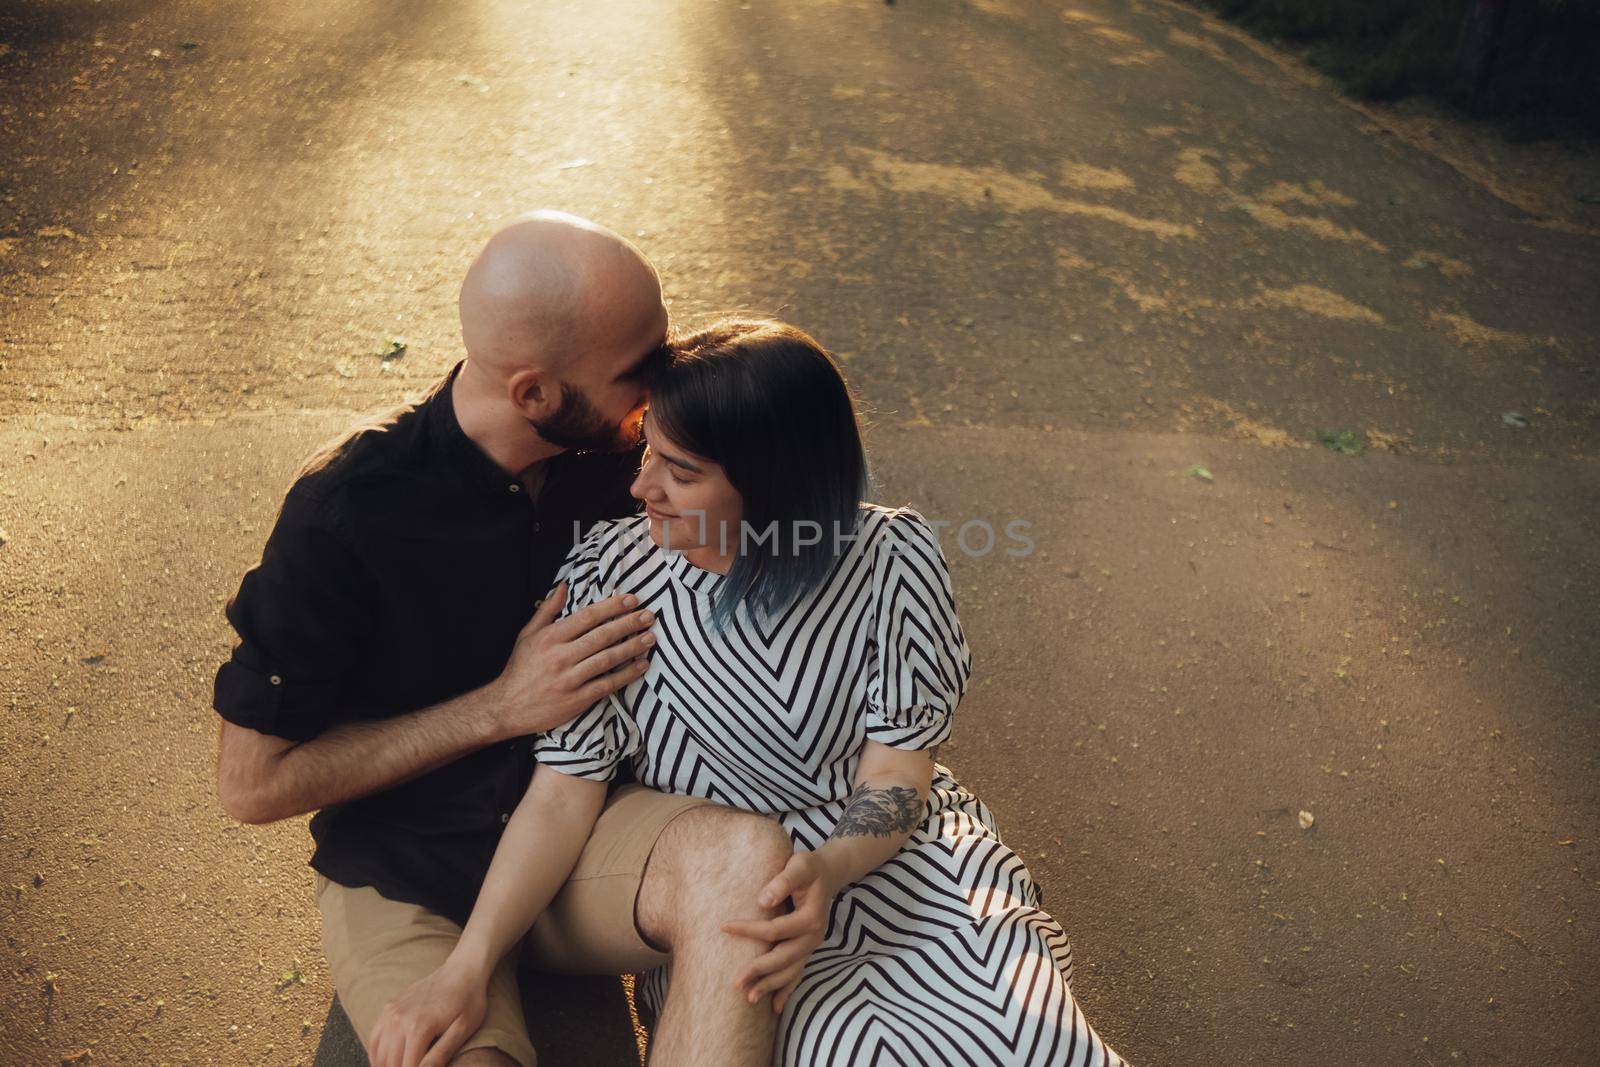 lovers sit in a hug on the asphalt against the background of the sun by Symonenko